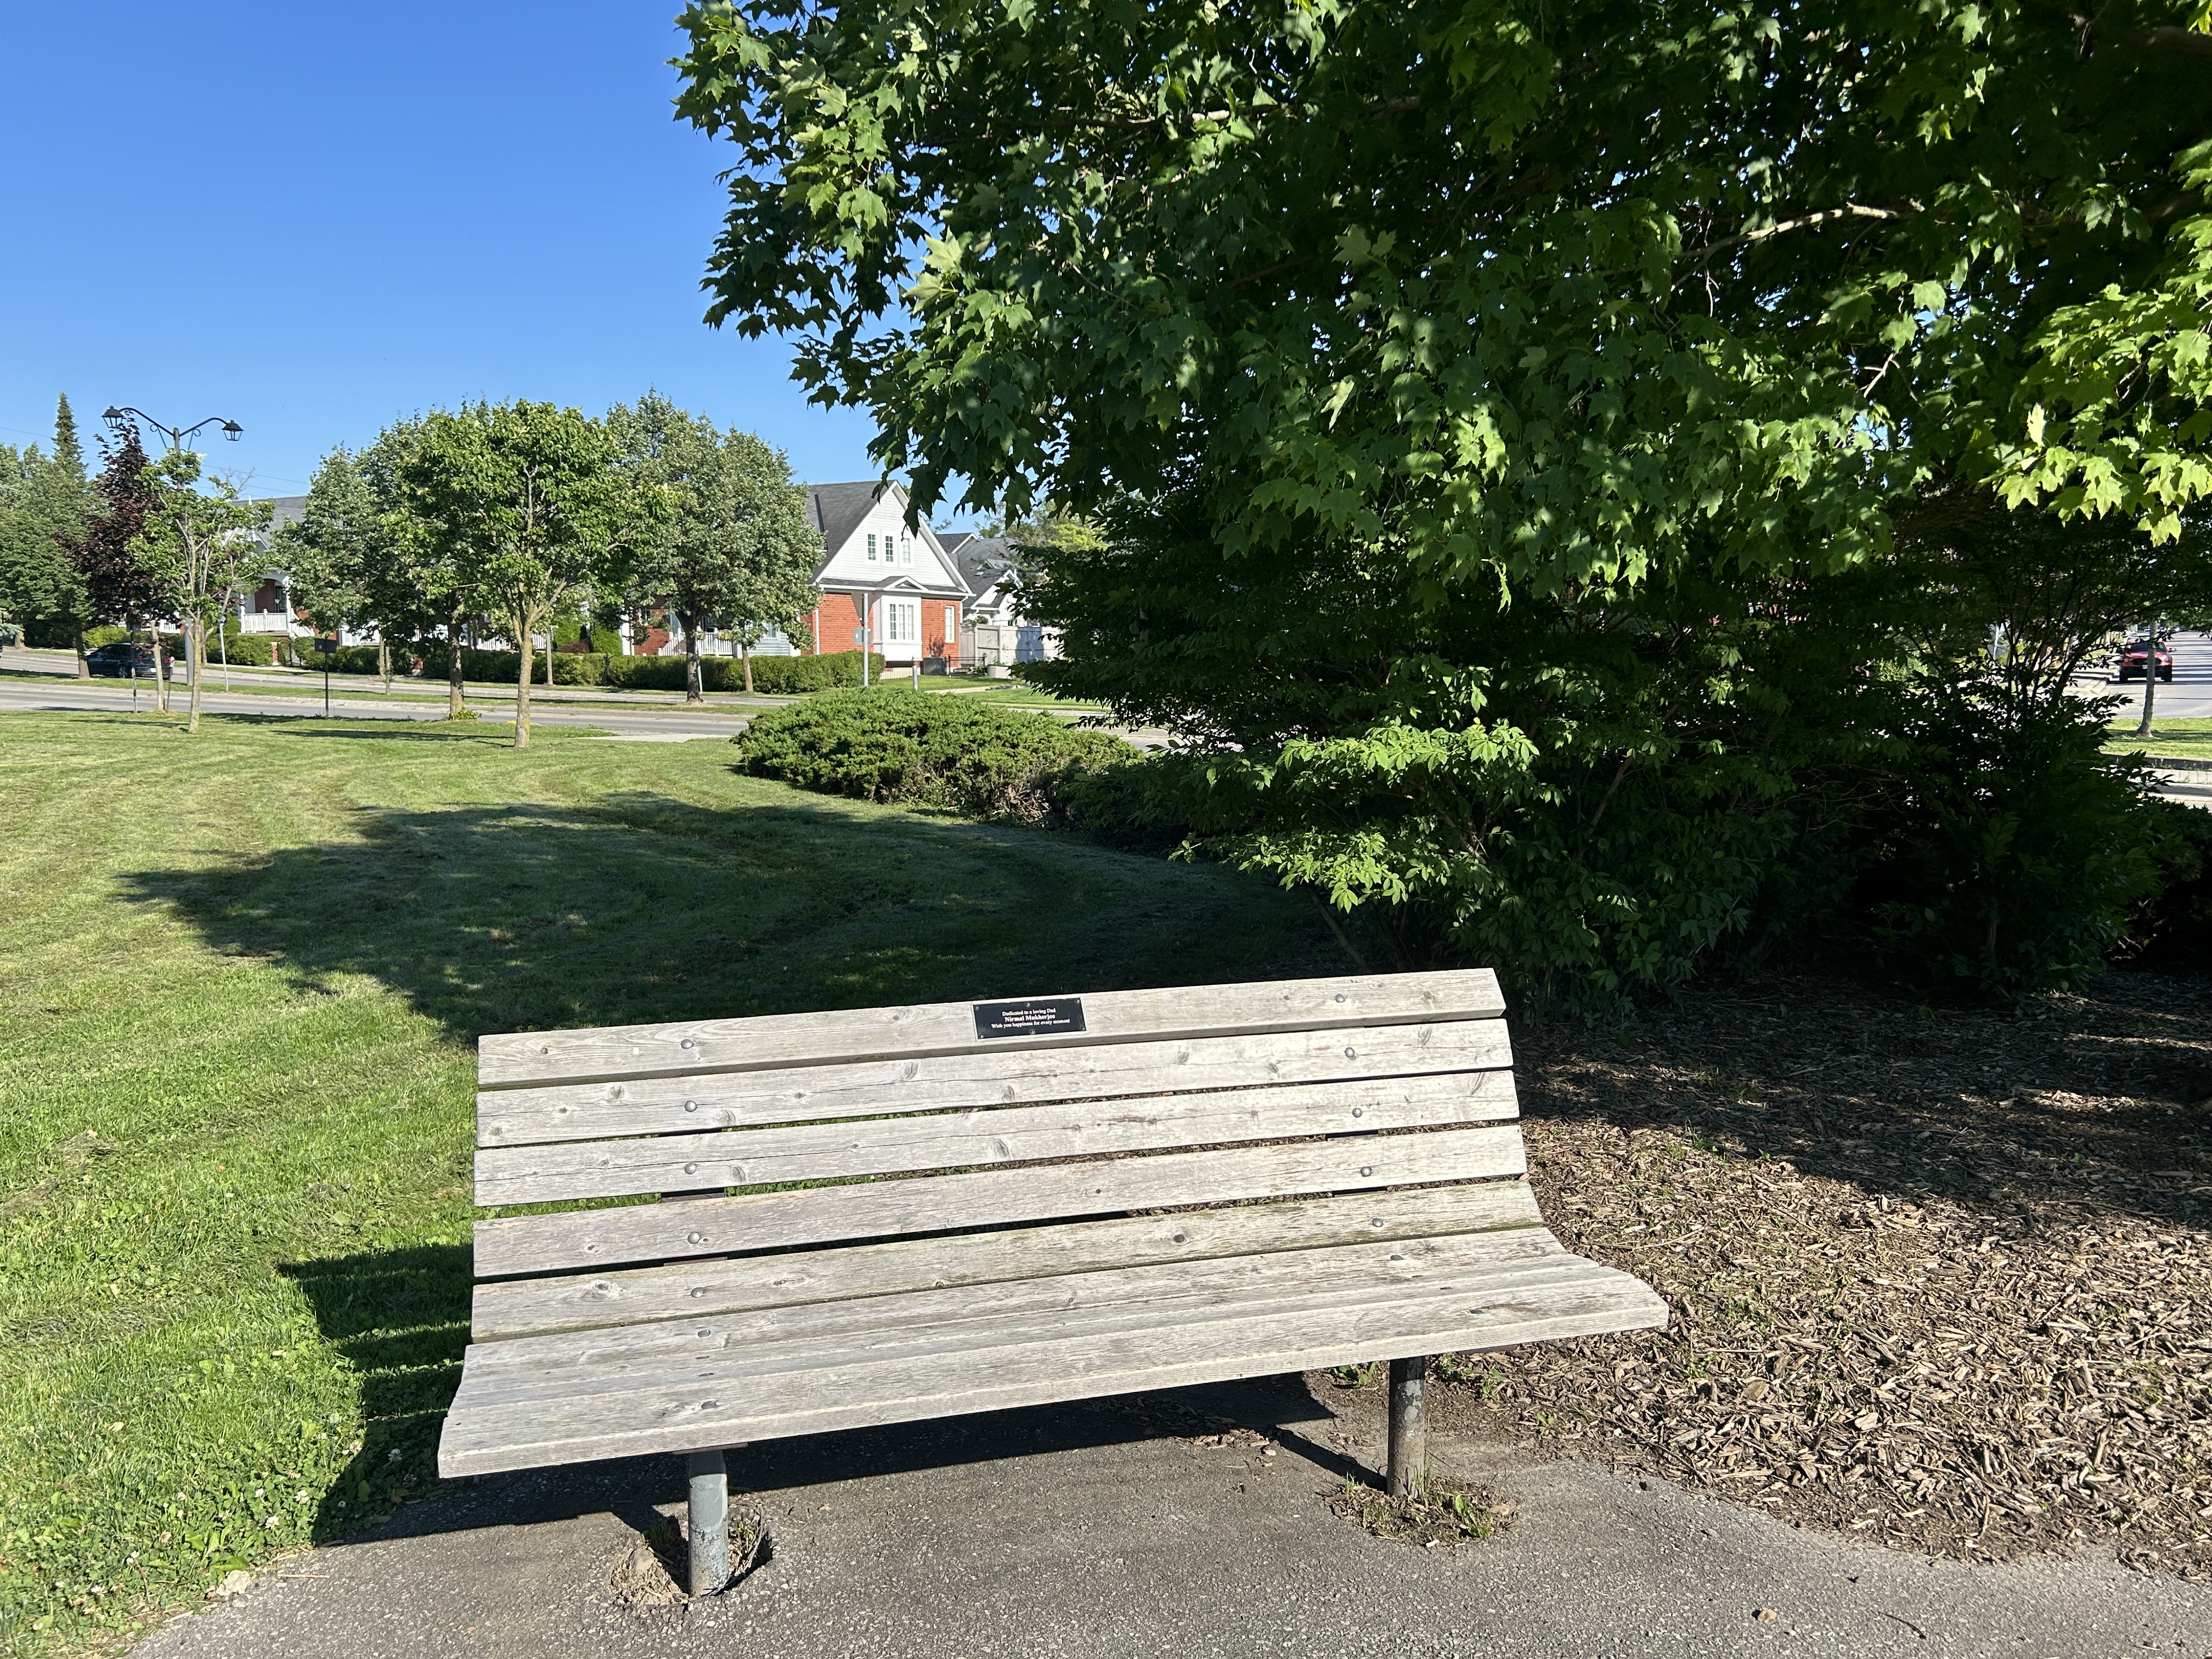 Image of Memorial Bench with plaque in park